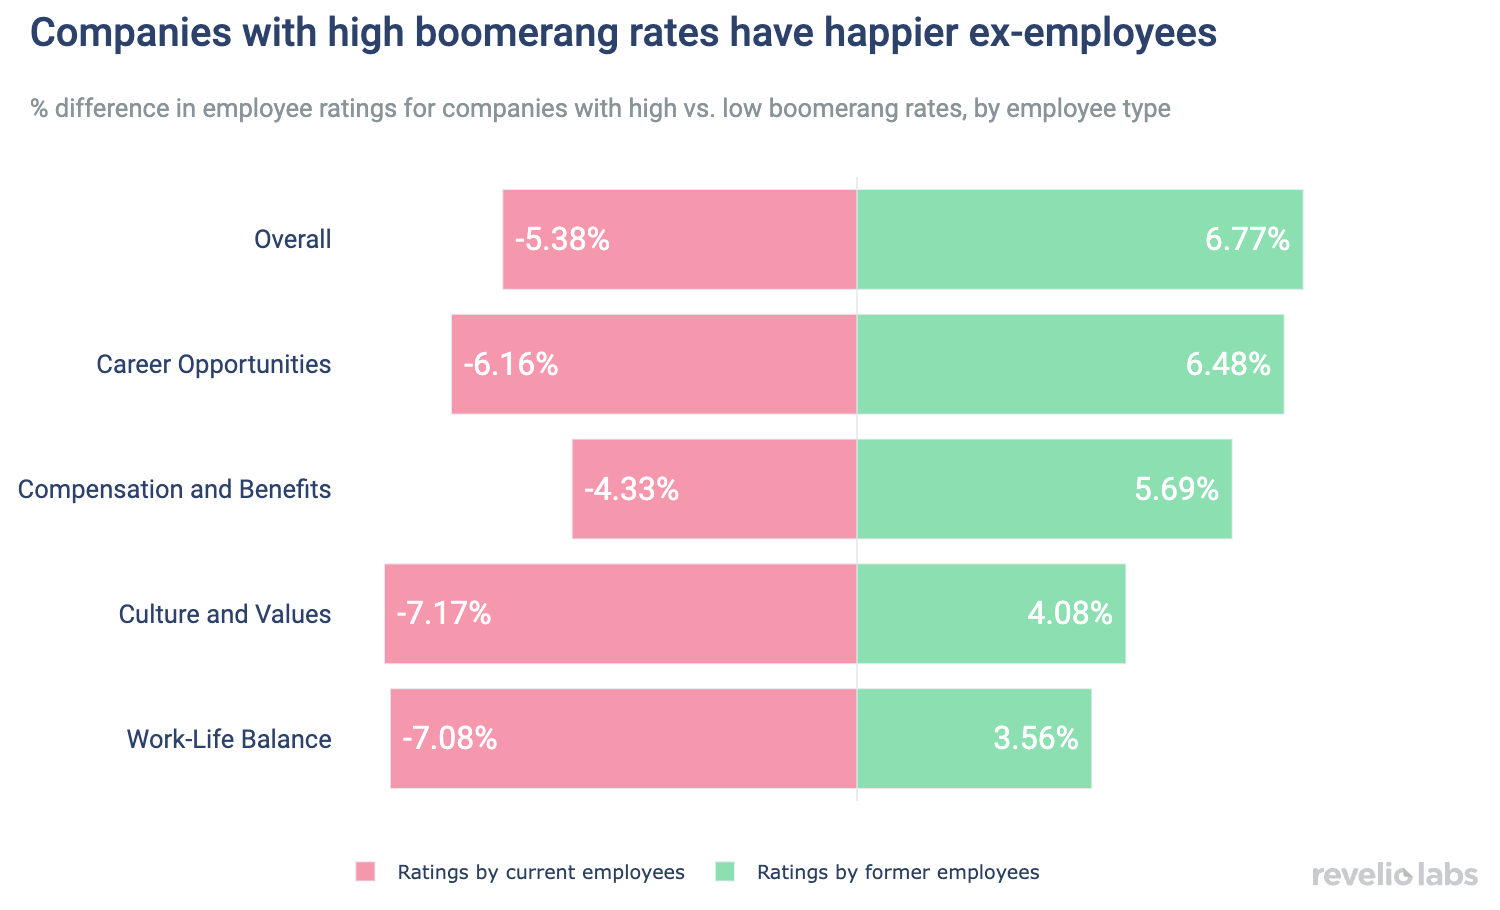 Companies with high boomerang rates have happier ex-employees